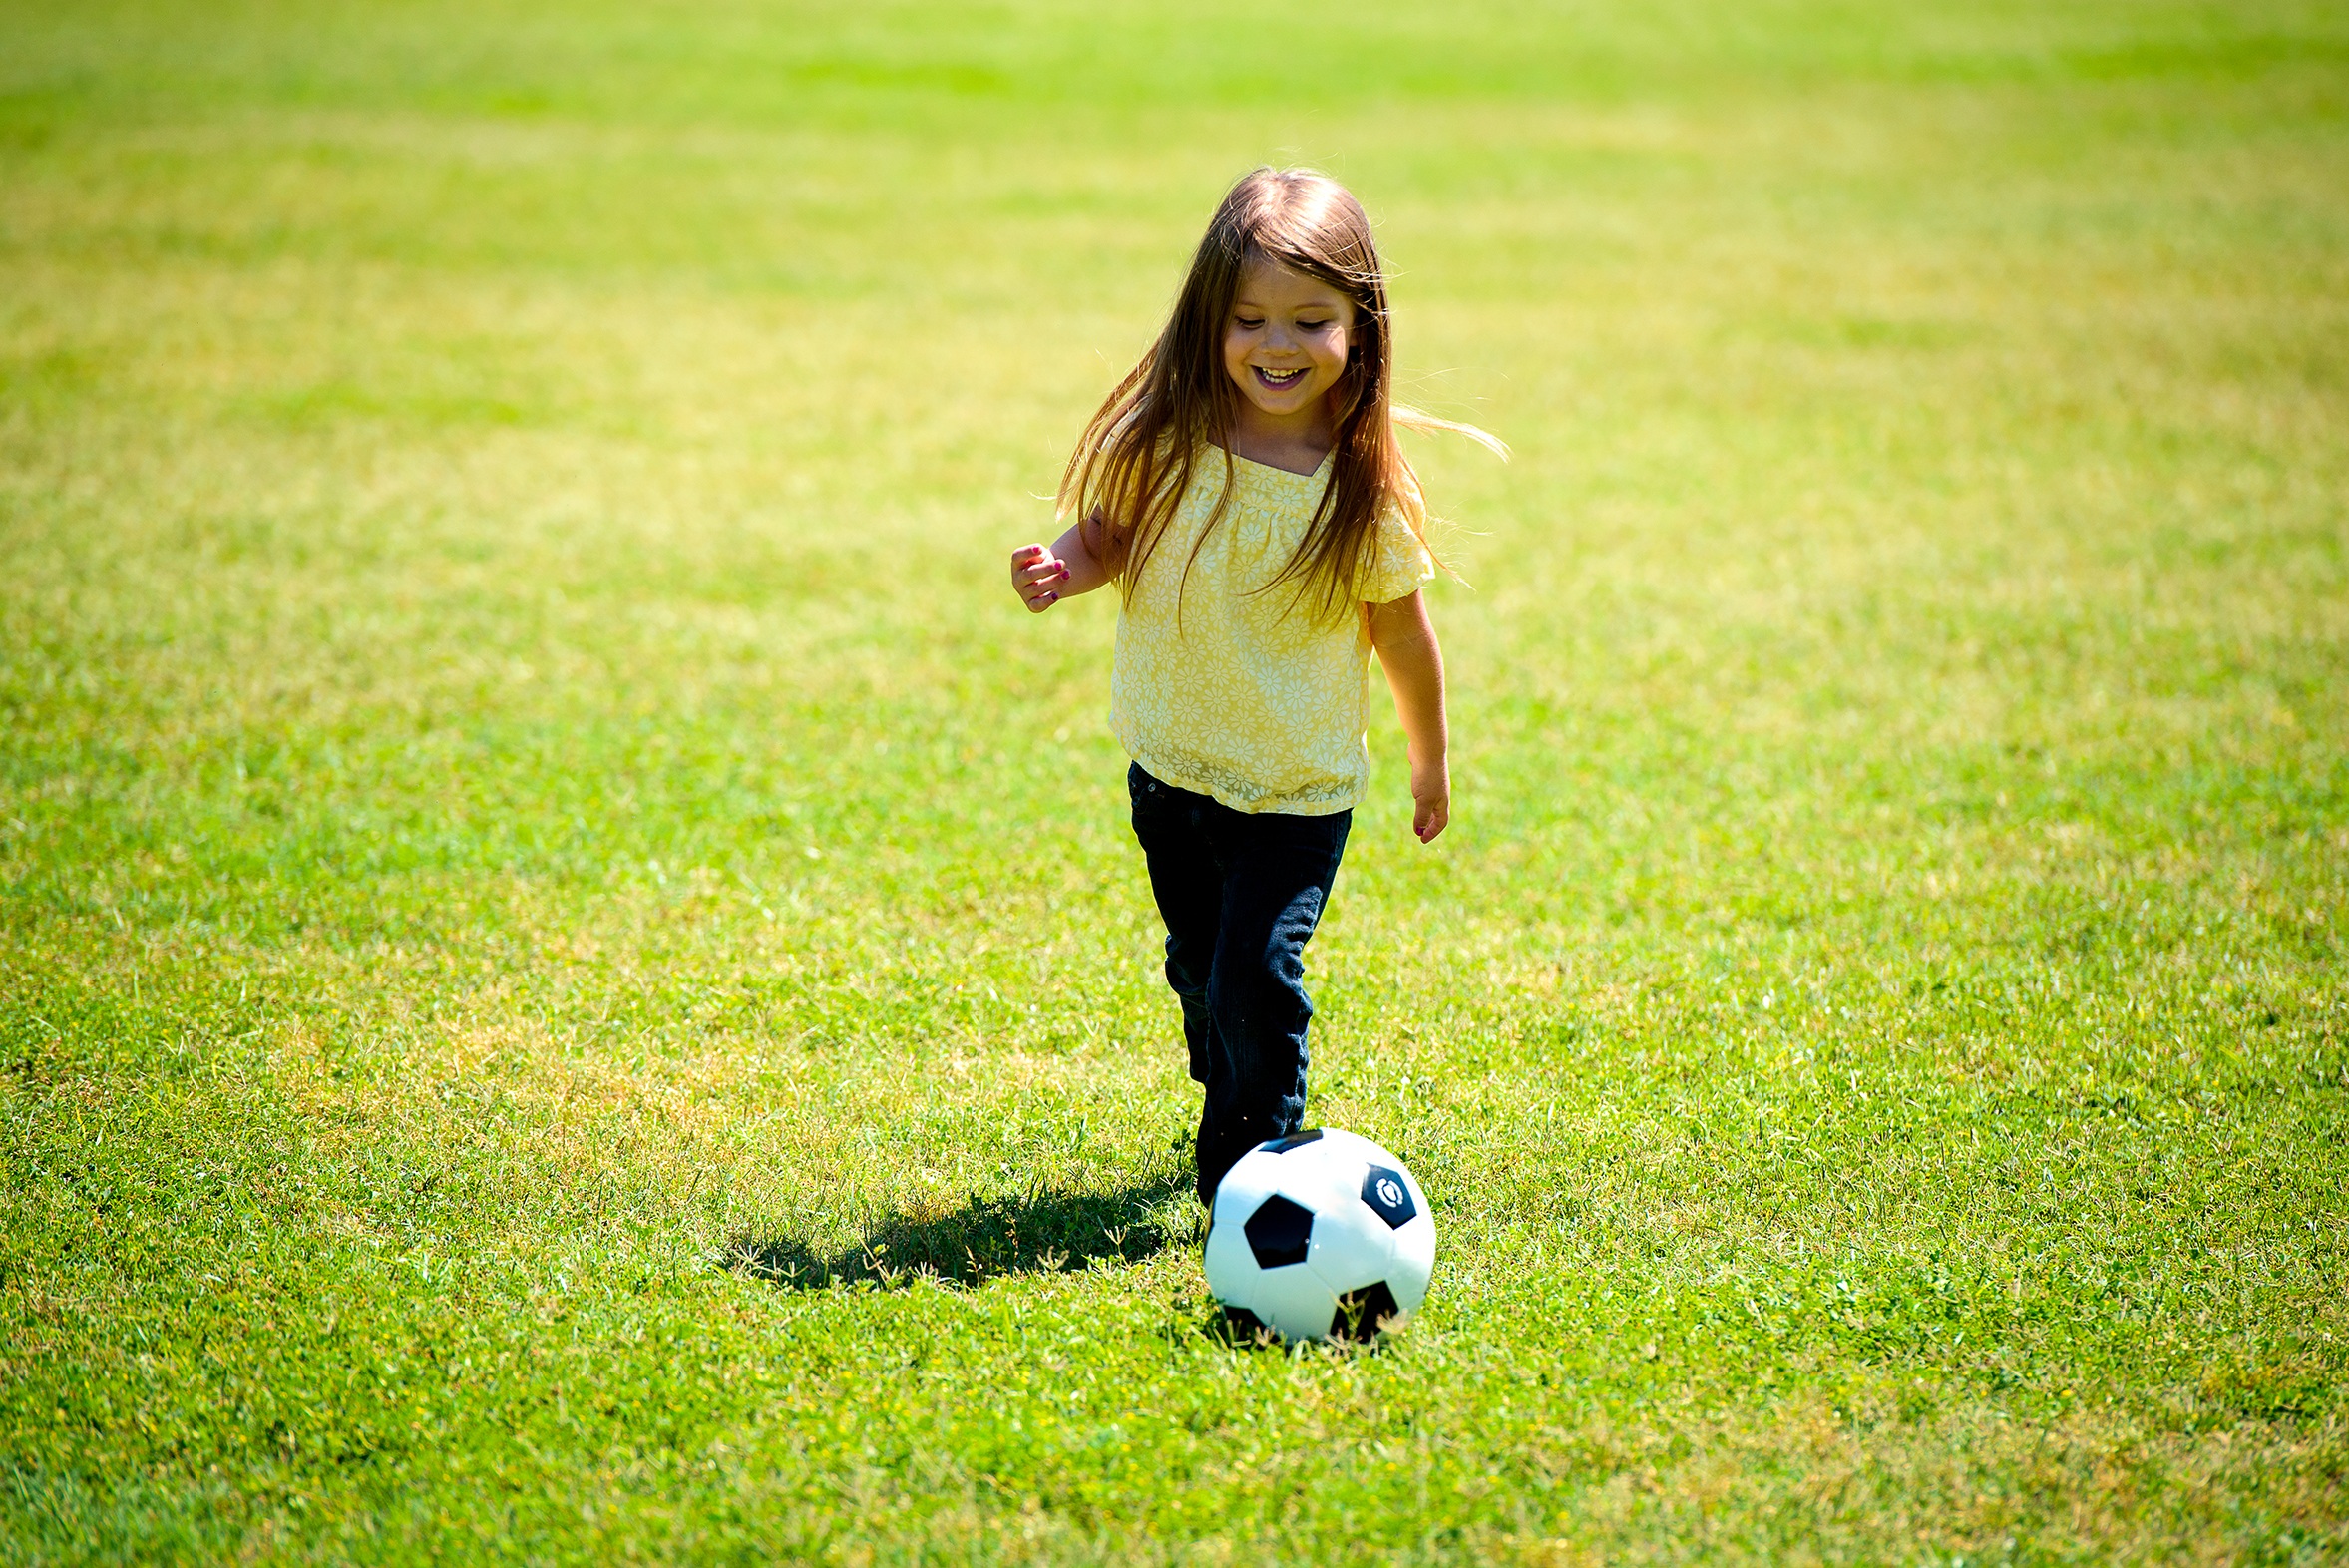 Free photo A little girl plays with a soccer ball on a green lawn